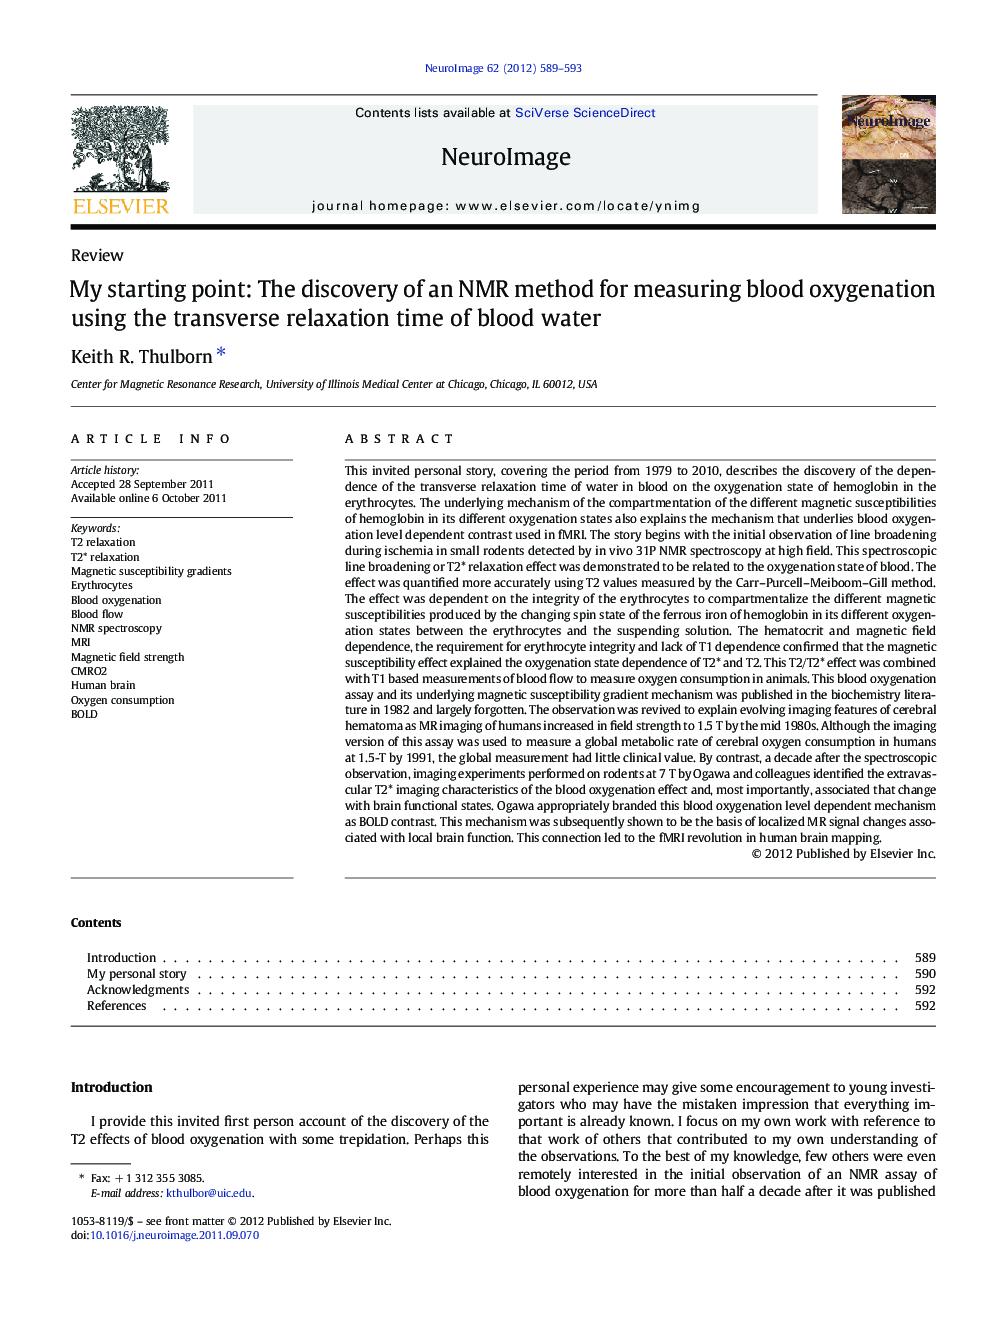 My starting point: The discovery of an NMR method for measuring blood oxygenation using the transverse relaxation time of blood water